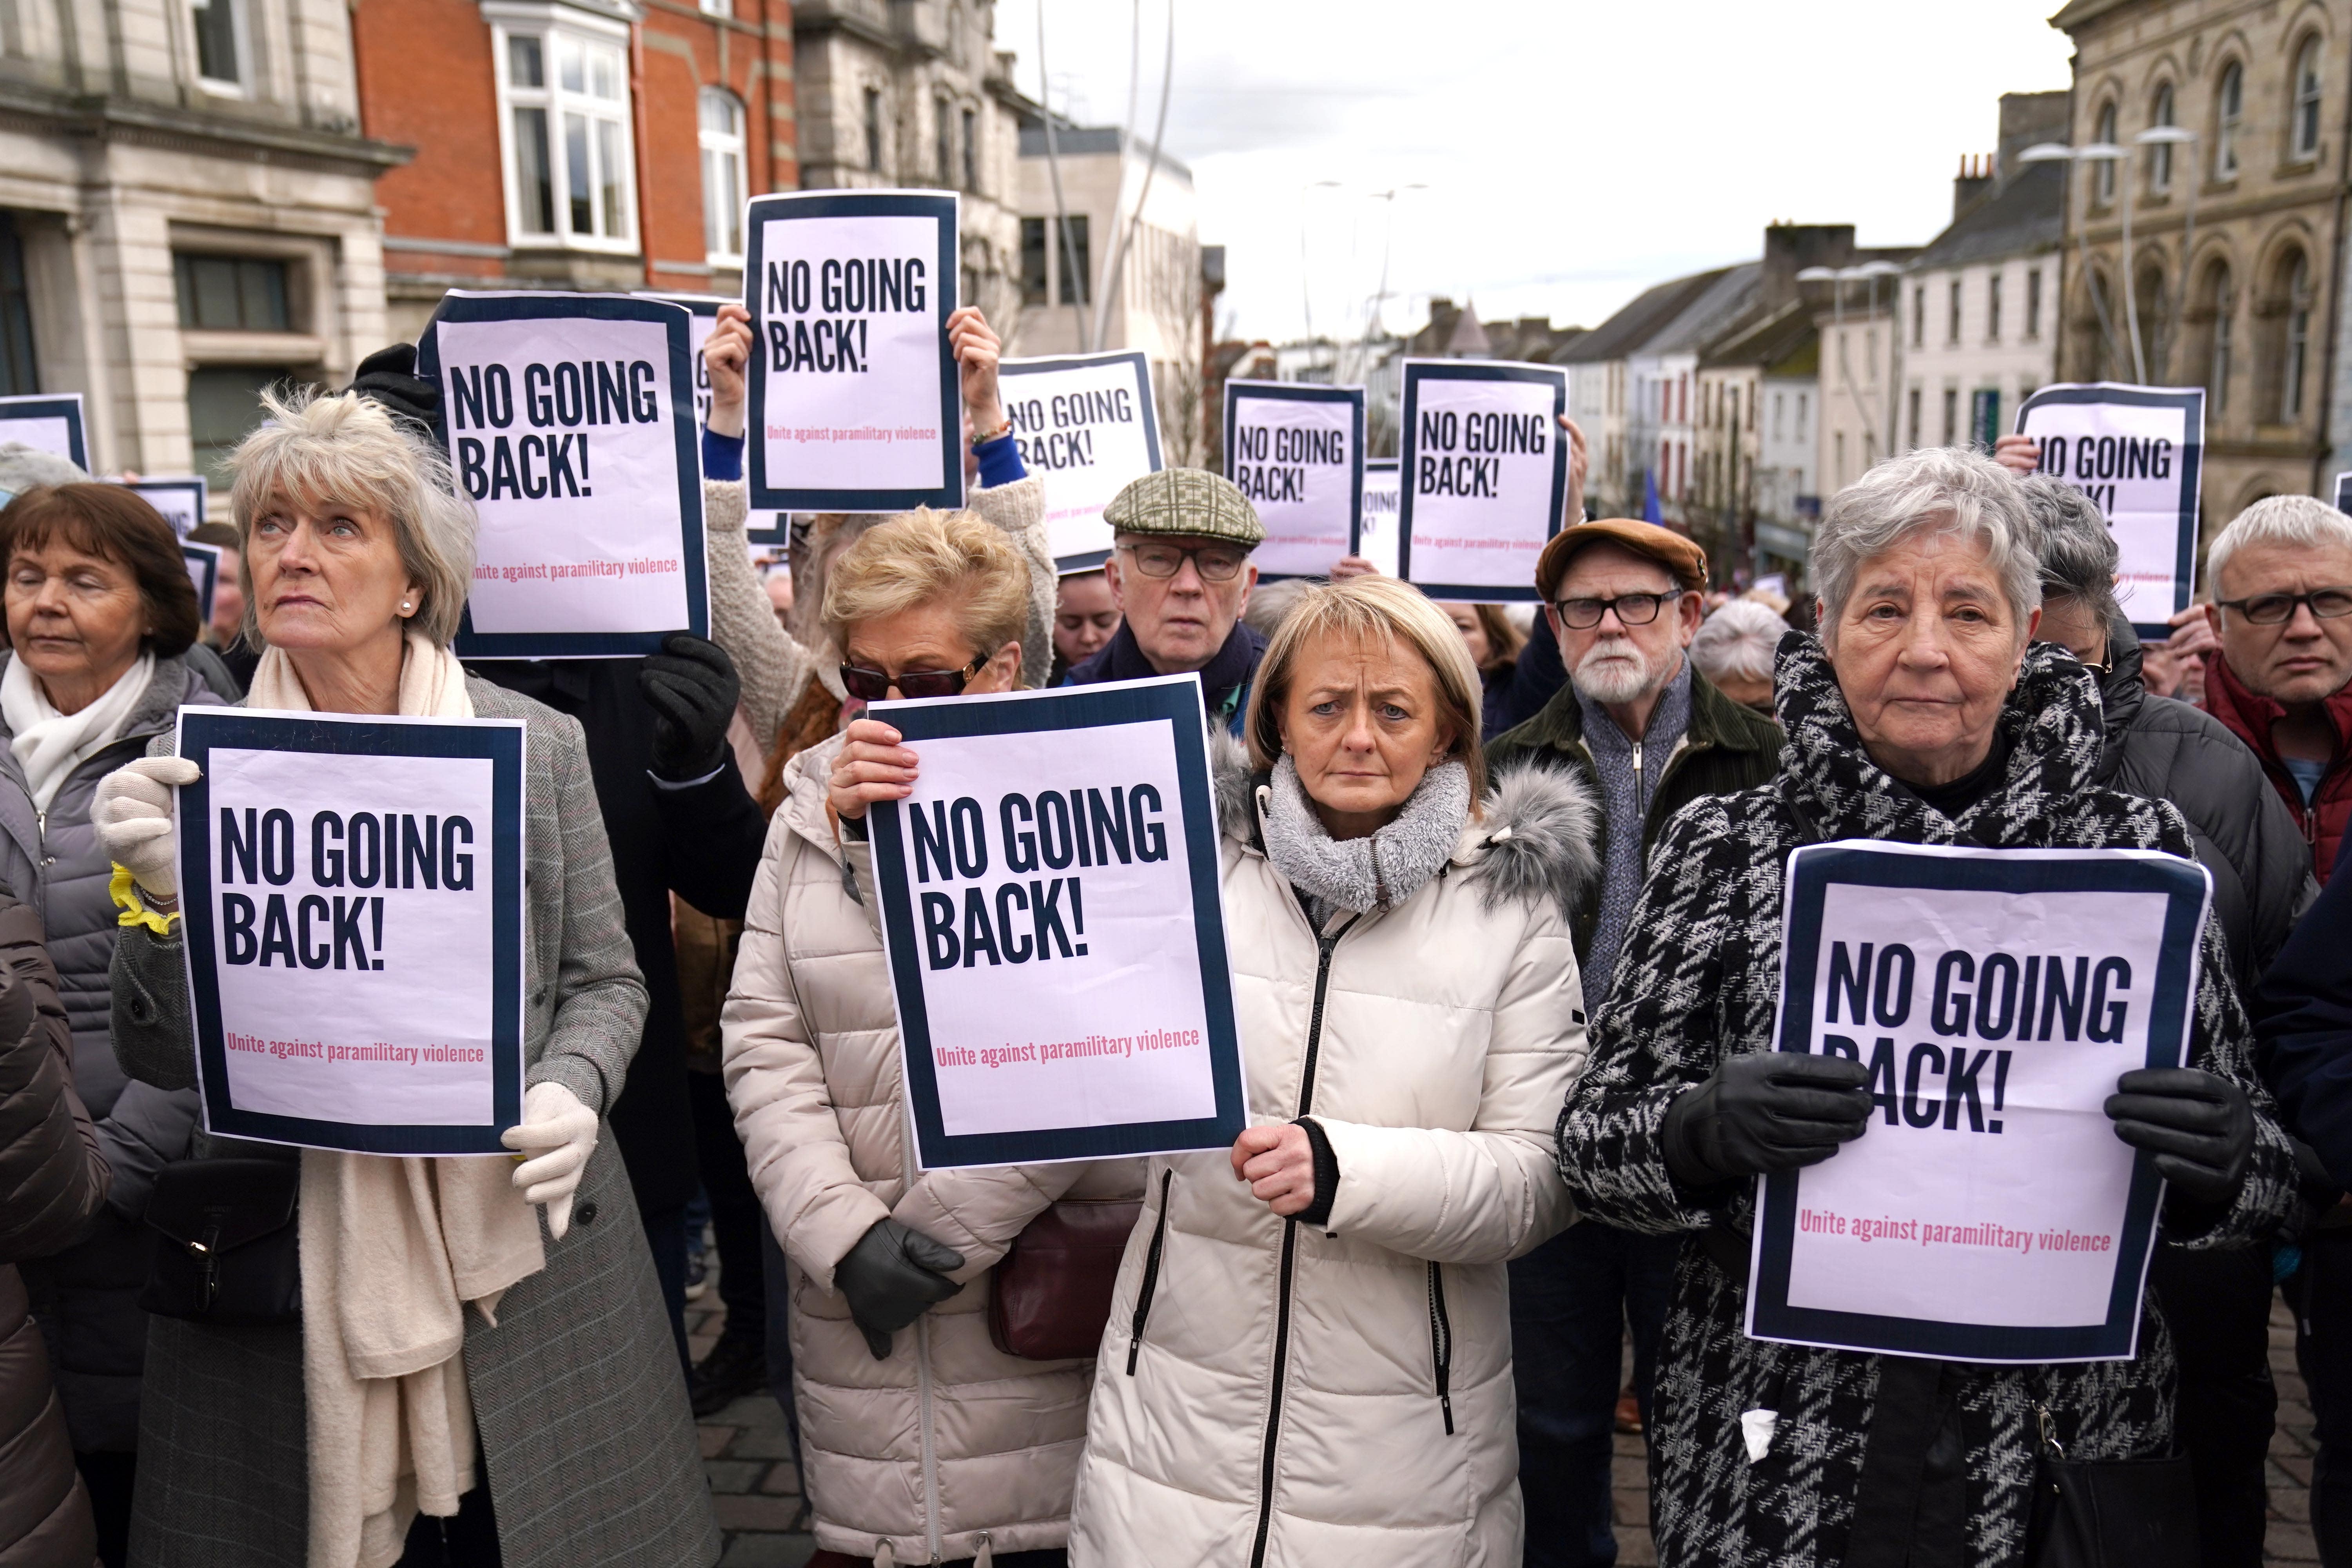 People taking part in a rally outside Omagh Courthouse to unite against paramilitary violence (PA)